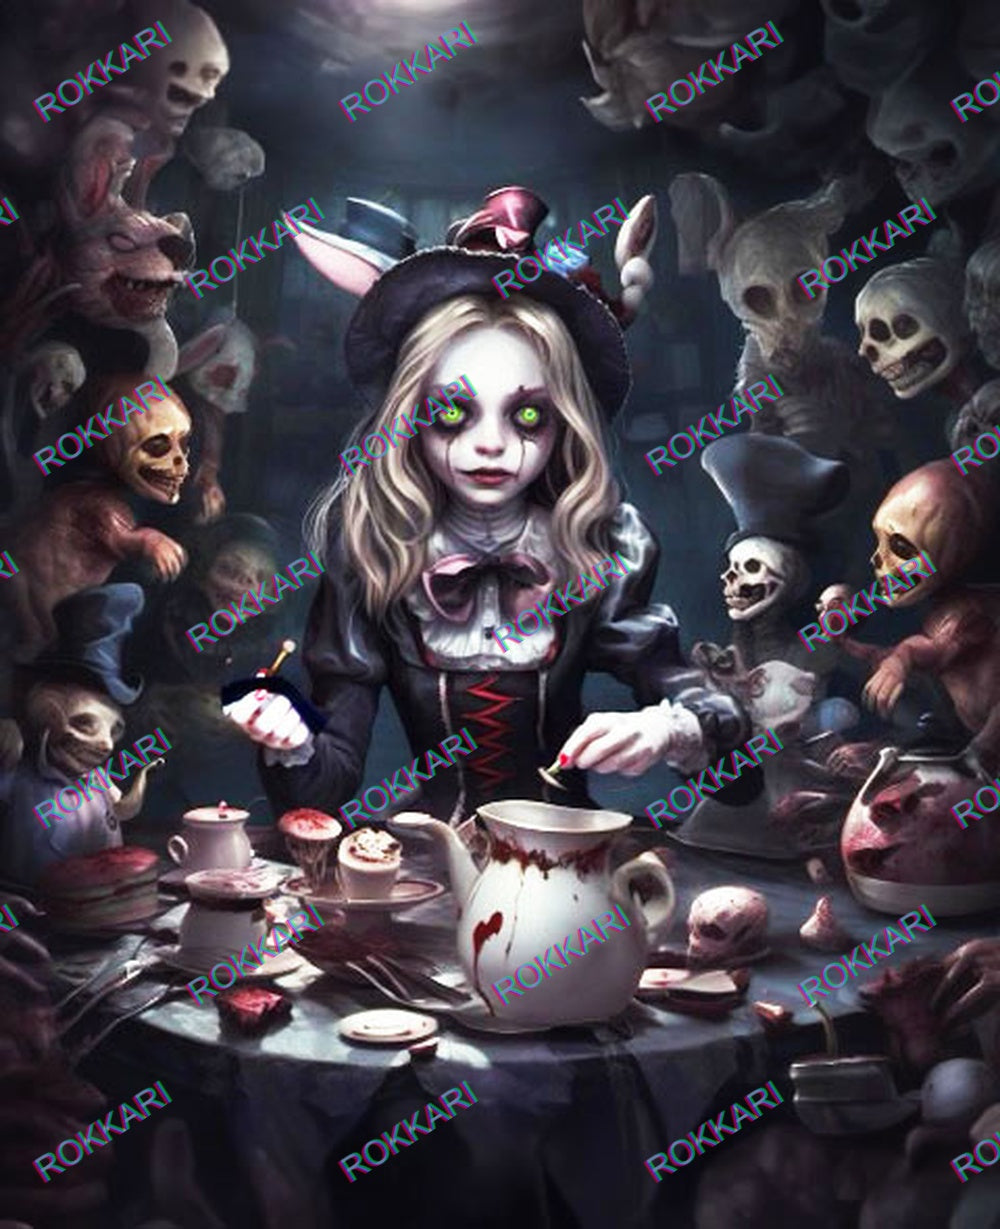 Pre-order Twisted Alice